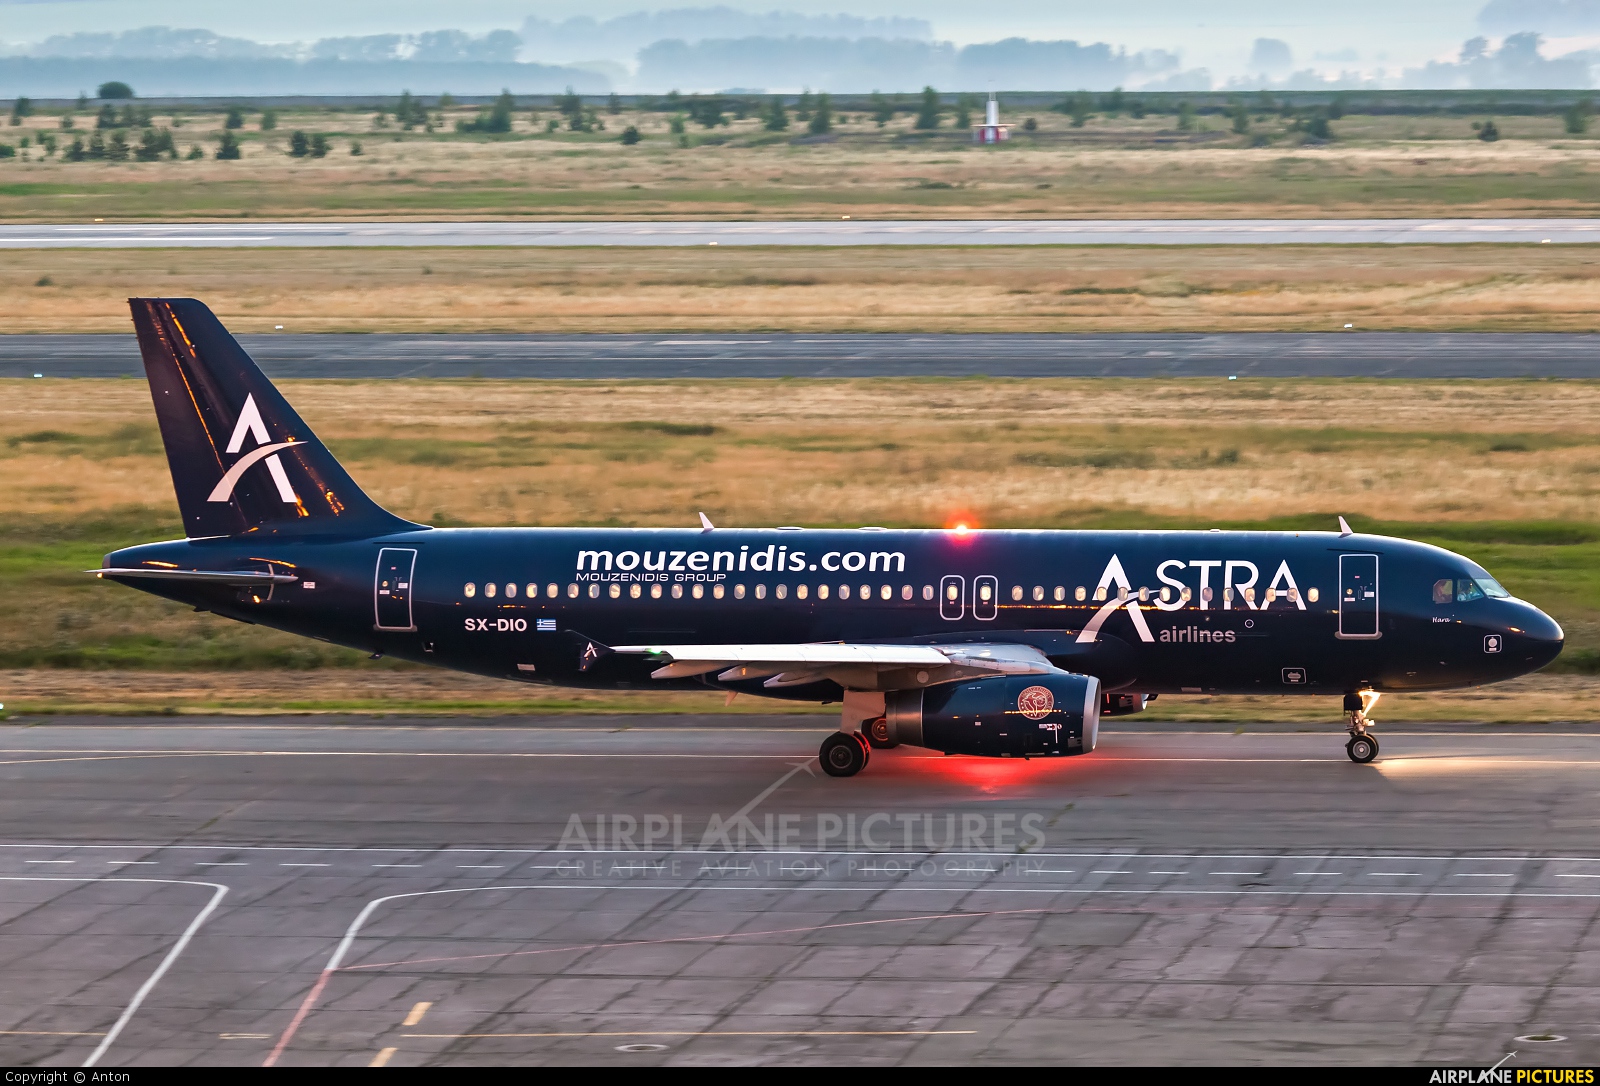 Astra Airlines SX-DIO aircraft at Chelyabinsk